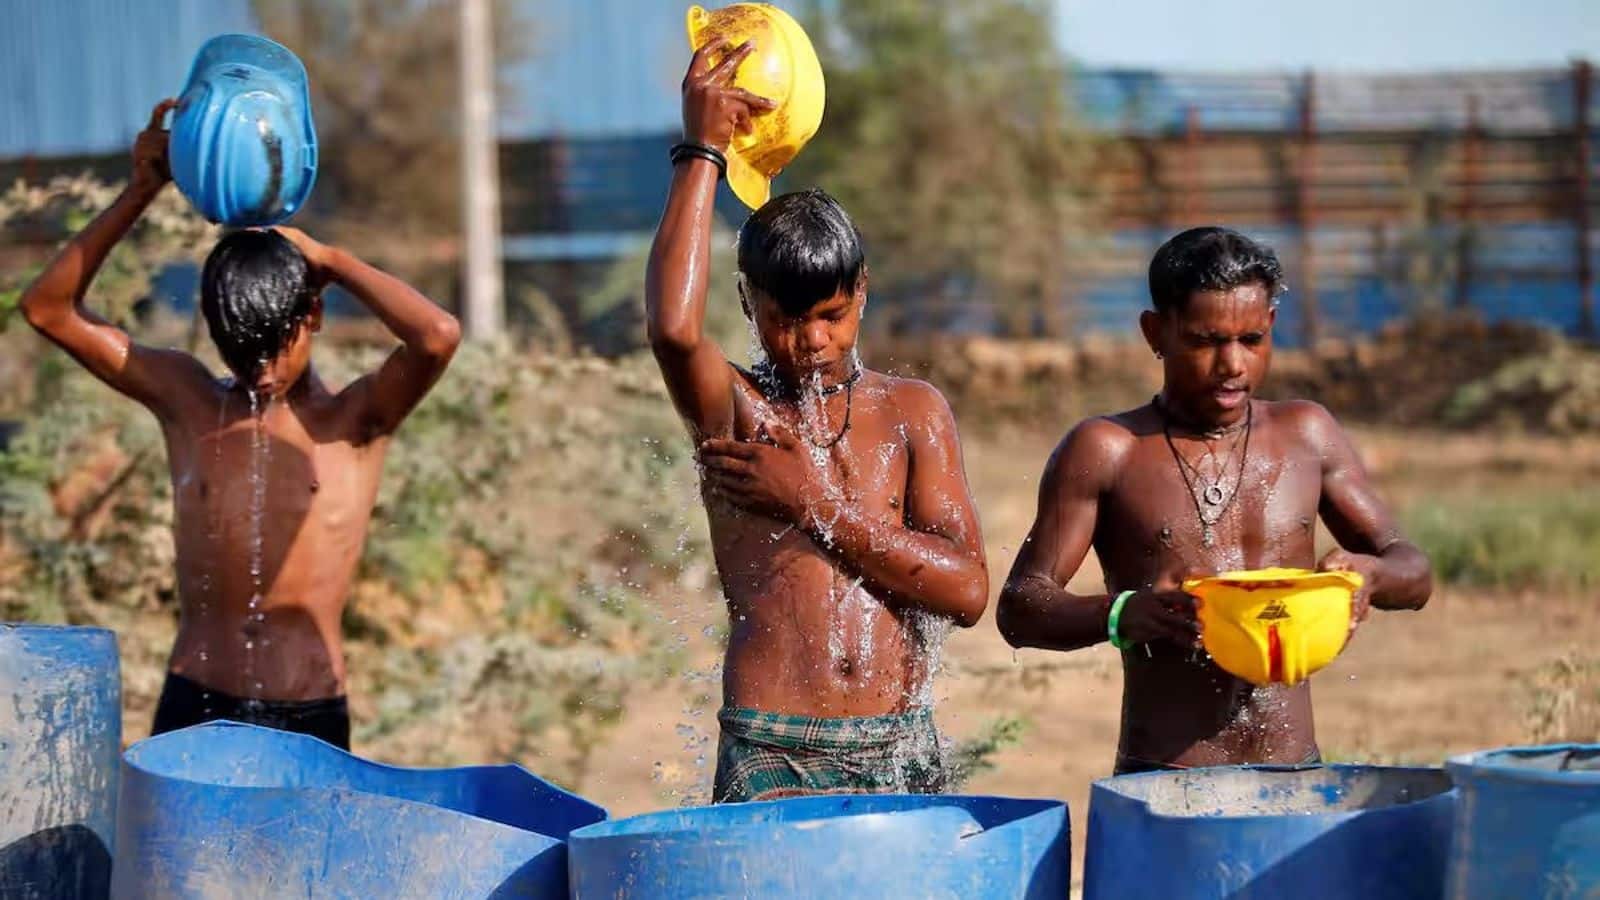 Severe heatwave sweeps across India, prompting warnings and closures